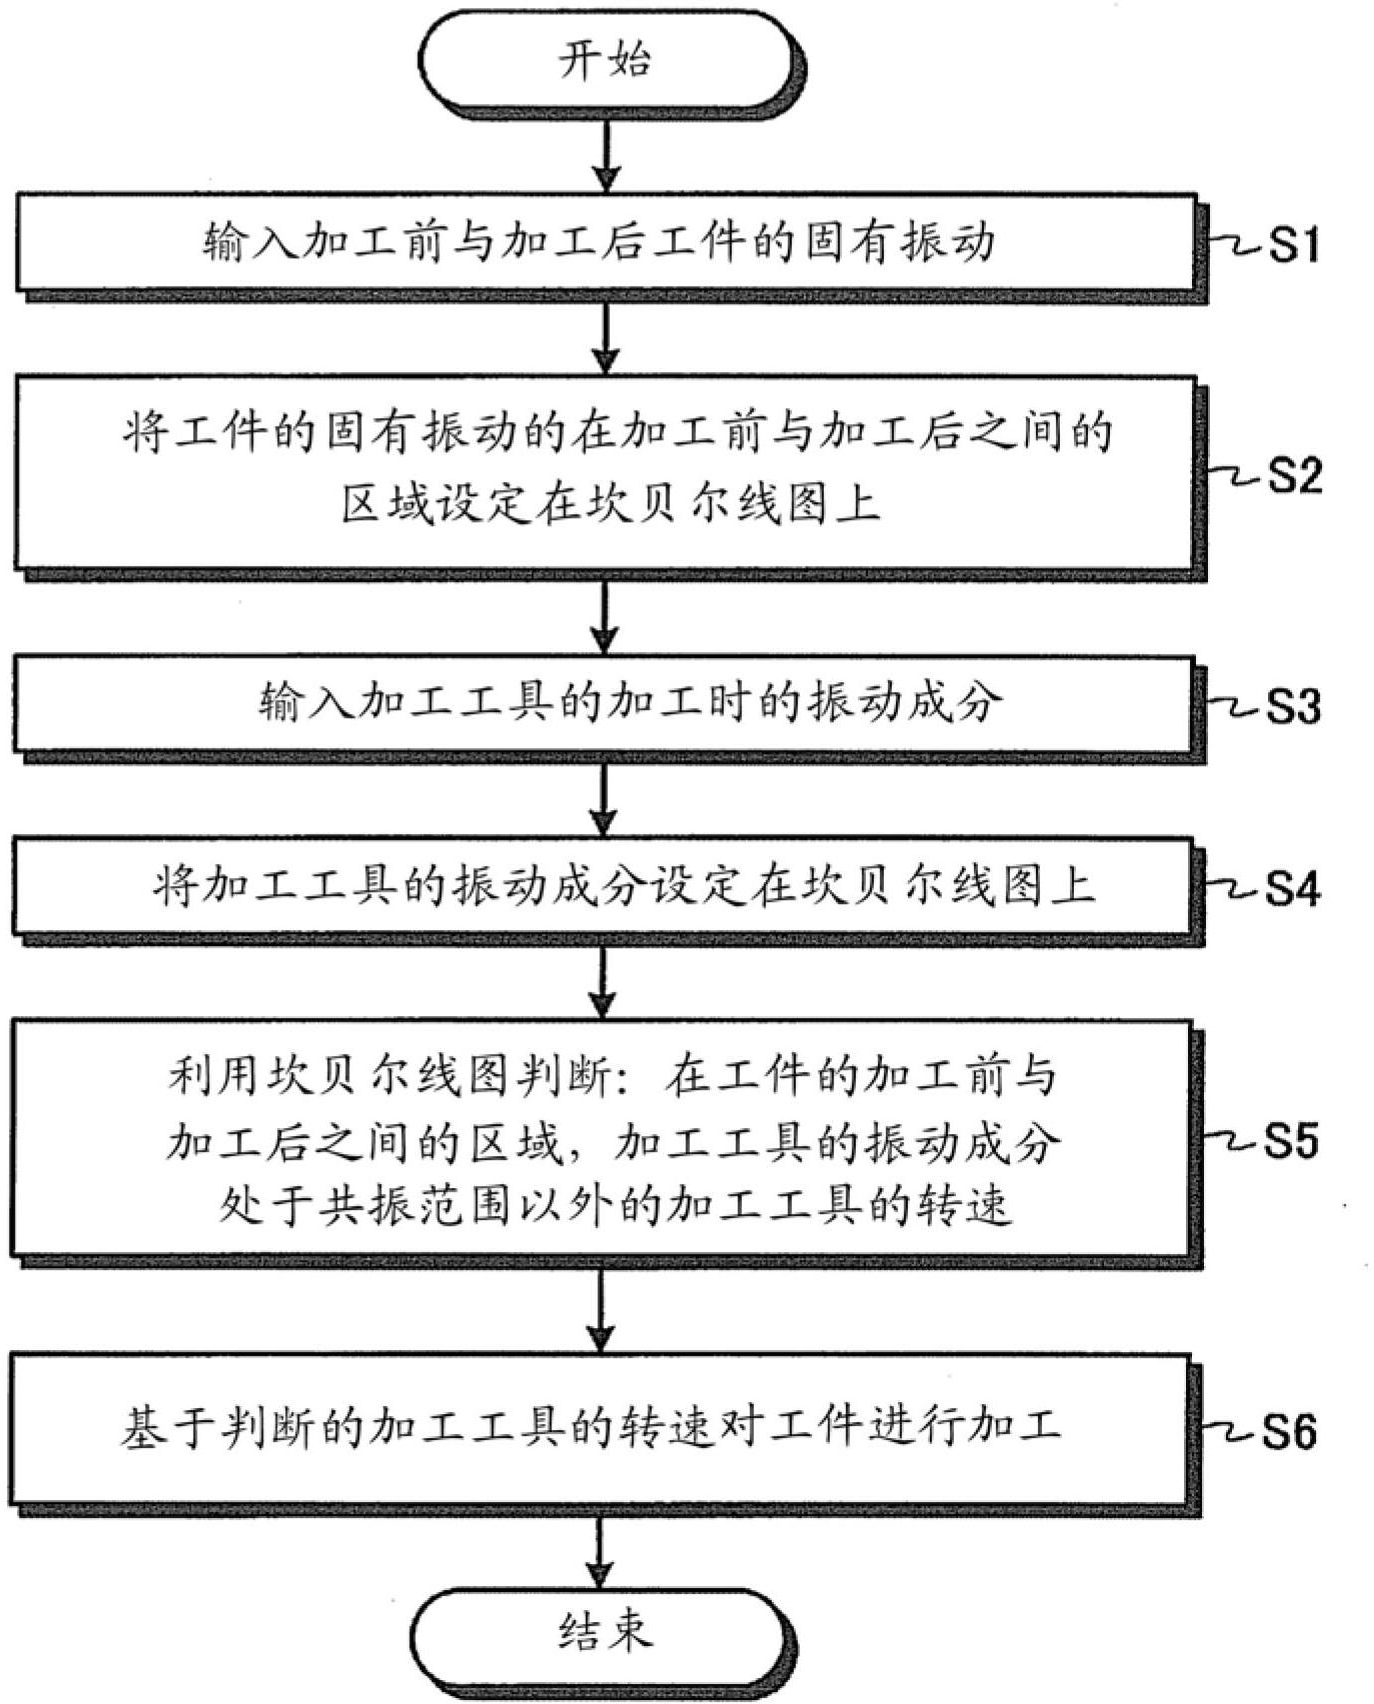 Machine tool control method and control device